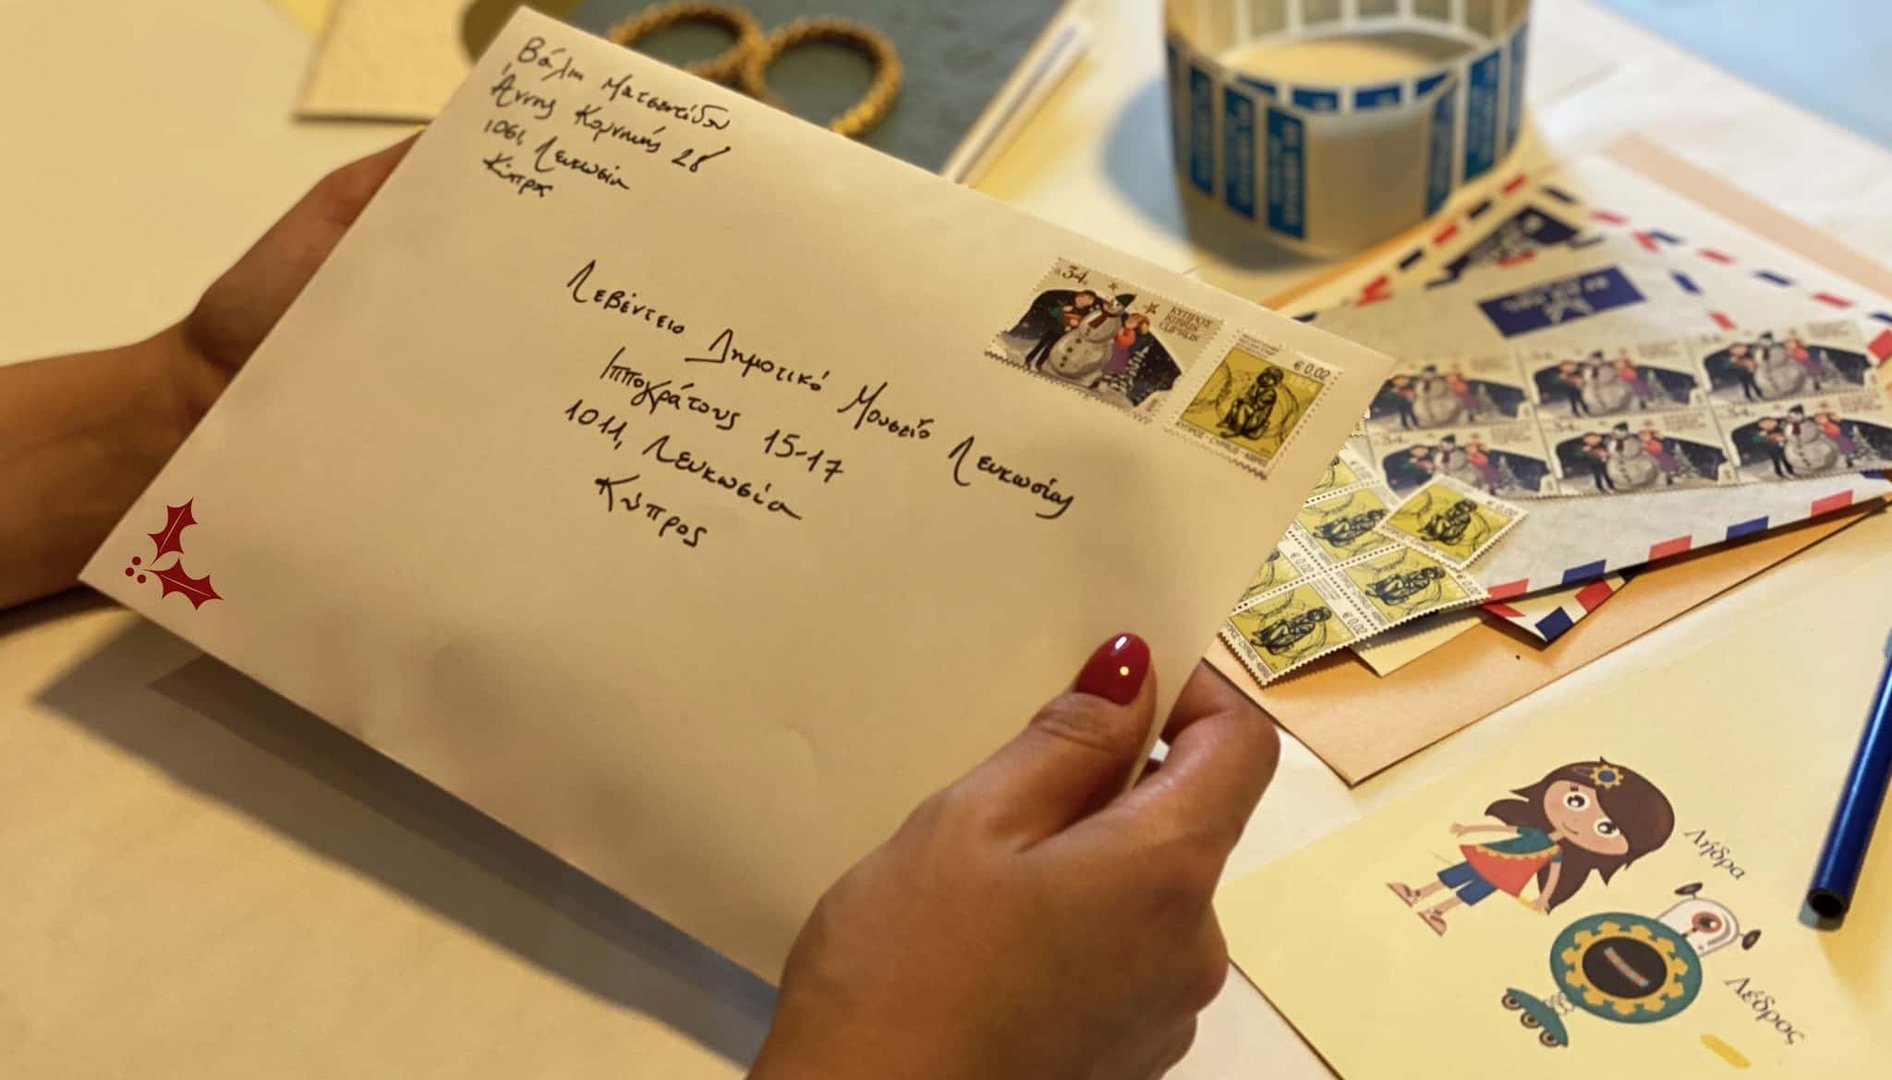 image Preserving the tradition of handwritten Christmas letters